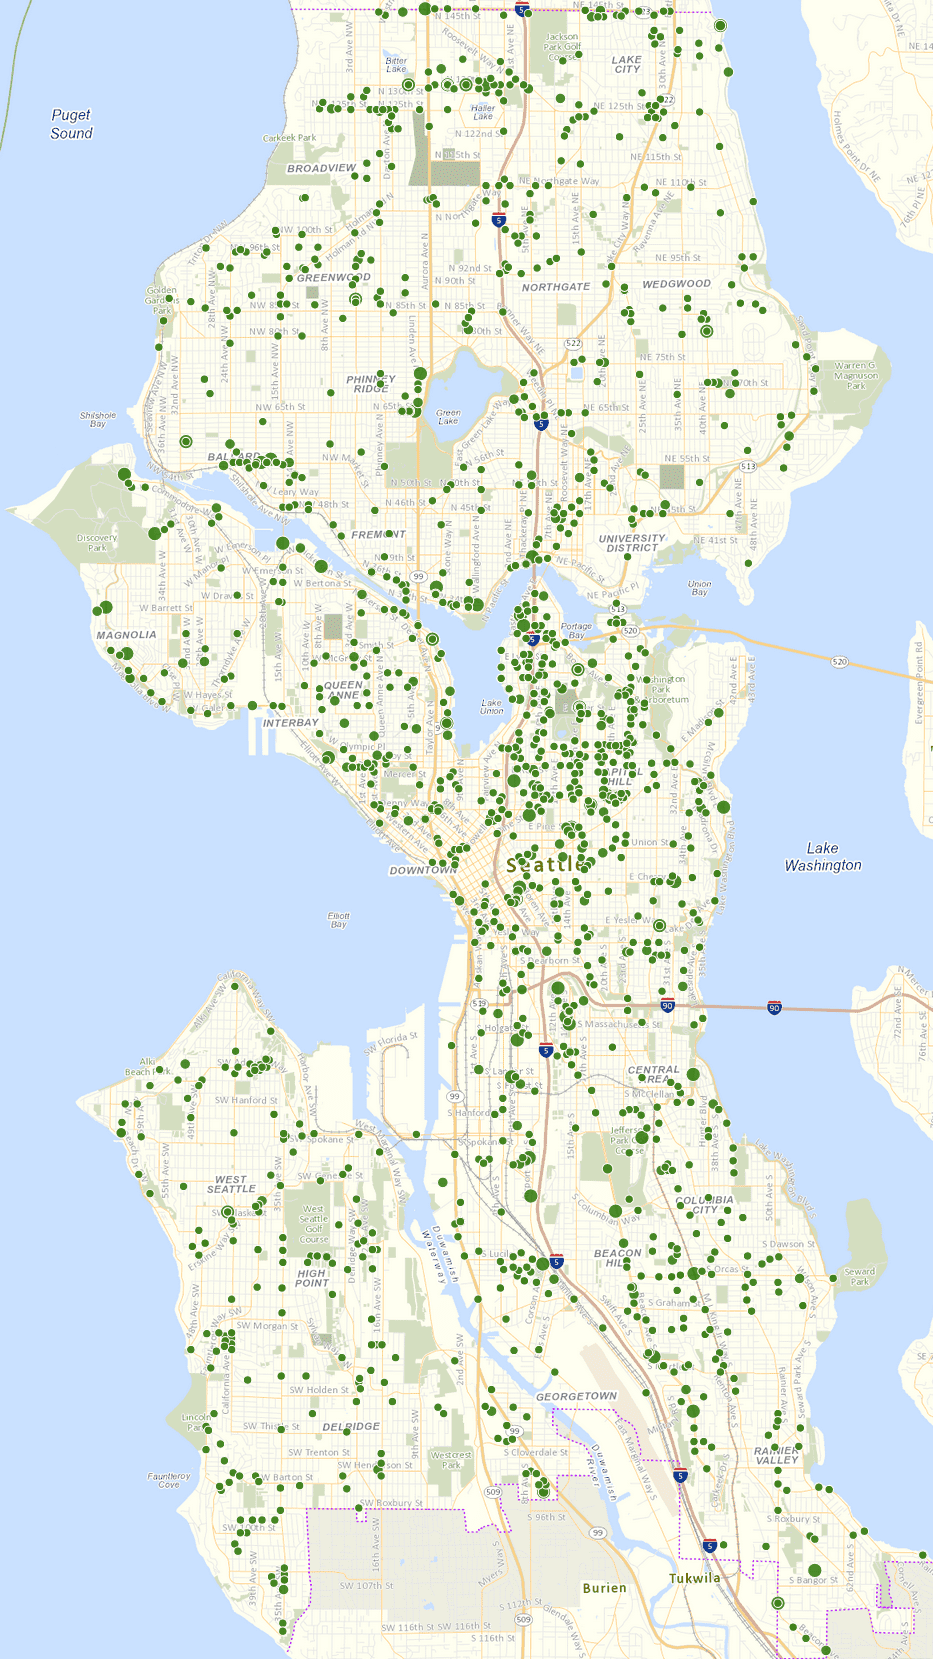 Map showing the location of recently filled potholes in the city of Seattle. Many green dots line the map throughout the city, indicating where potholes have been recently filled.